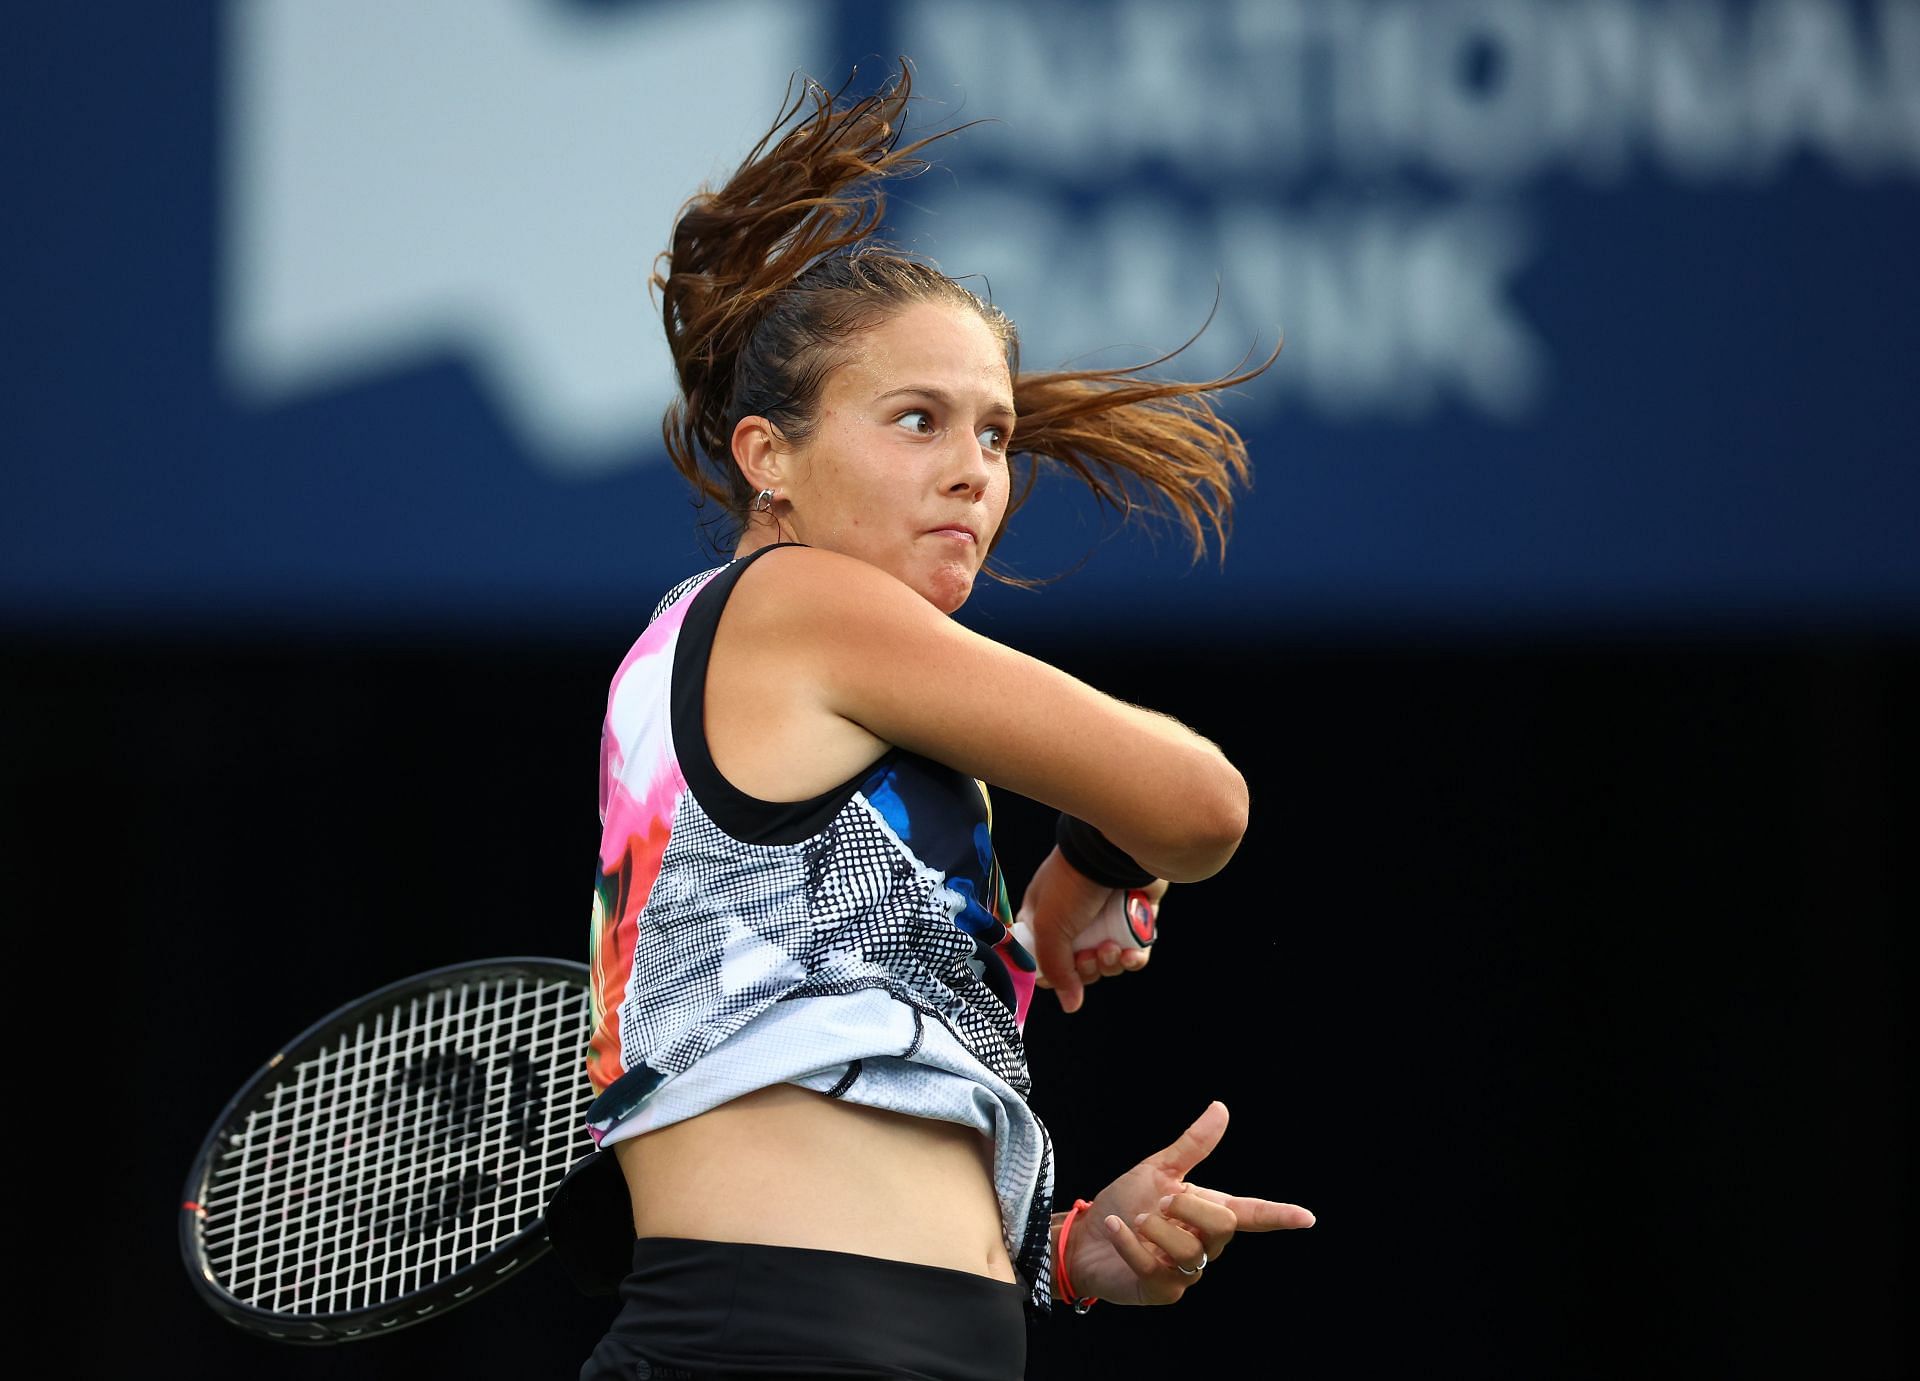 Daria Kasatkina in action at the Canadian Open